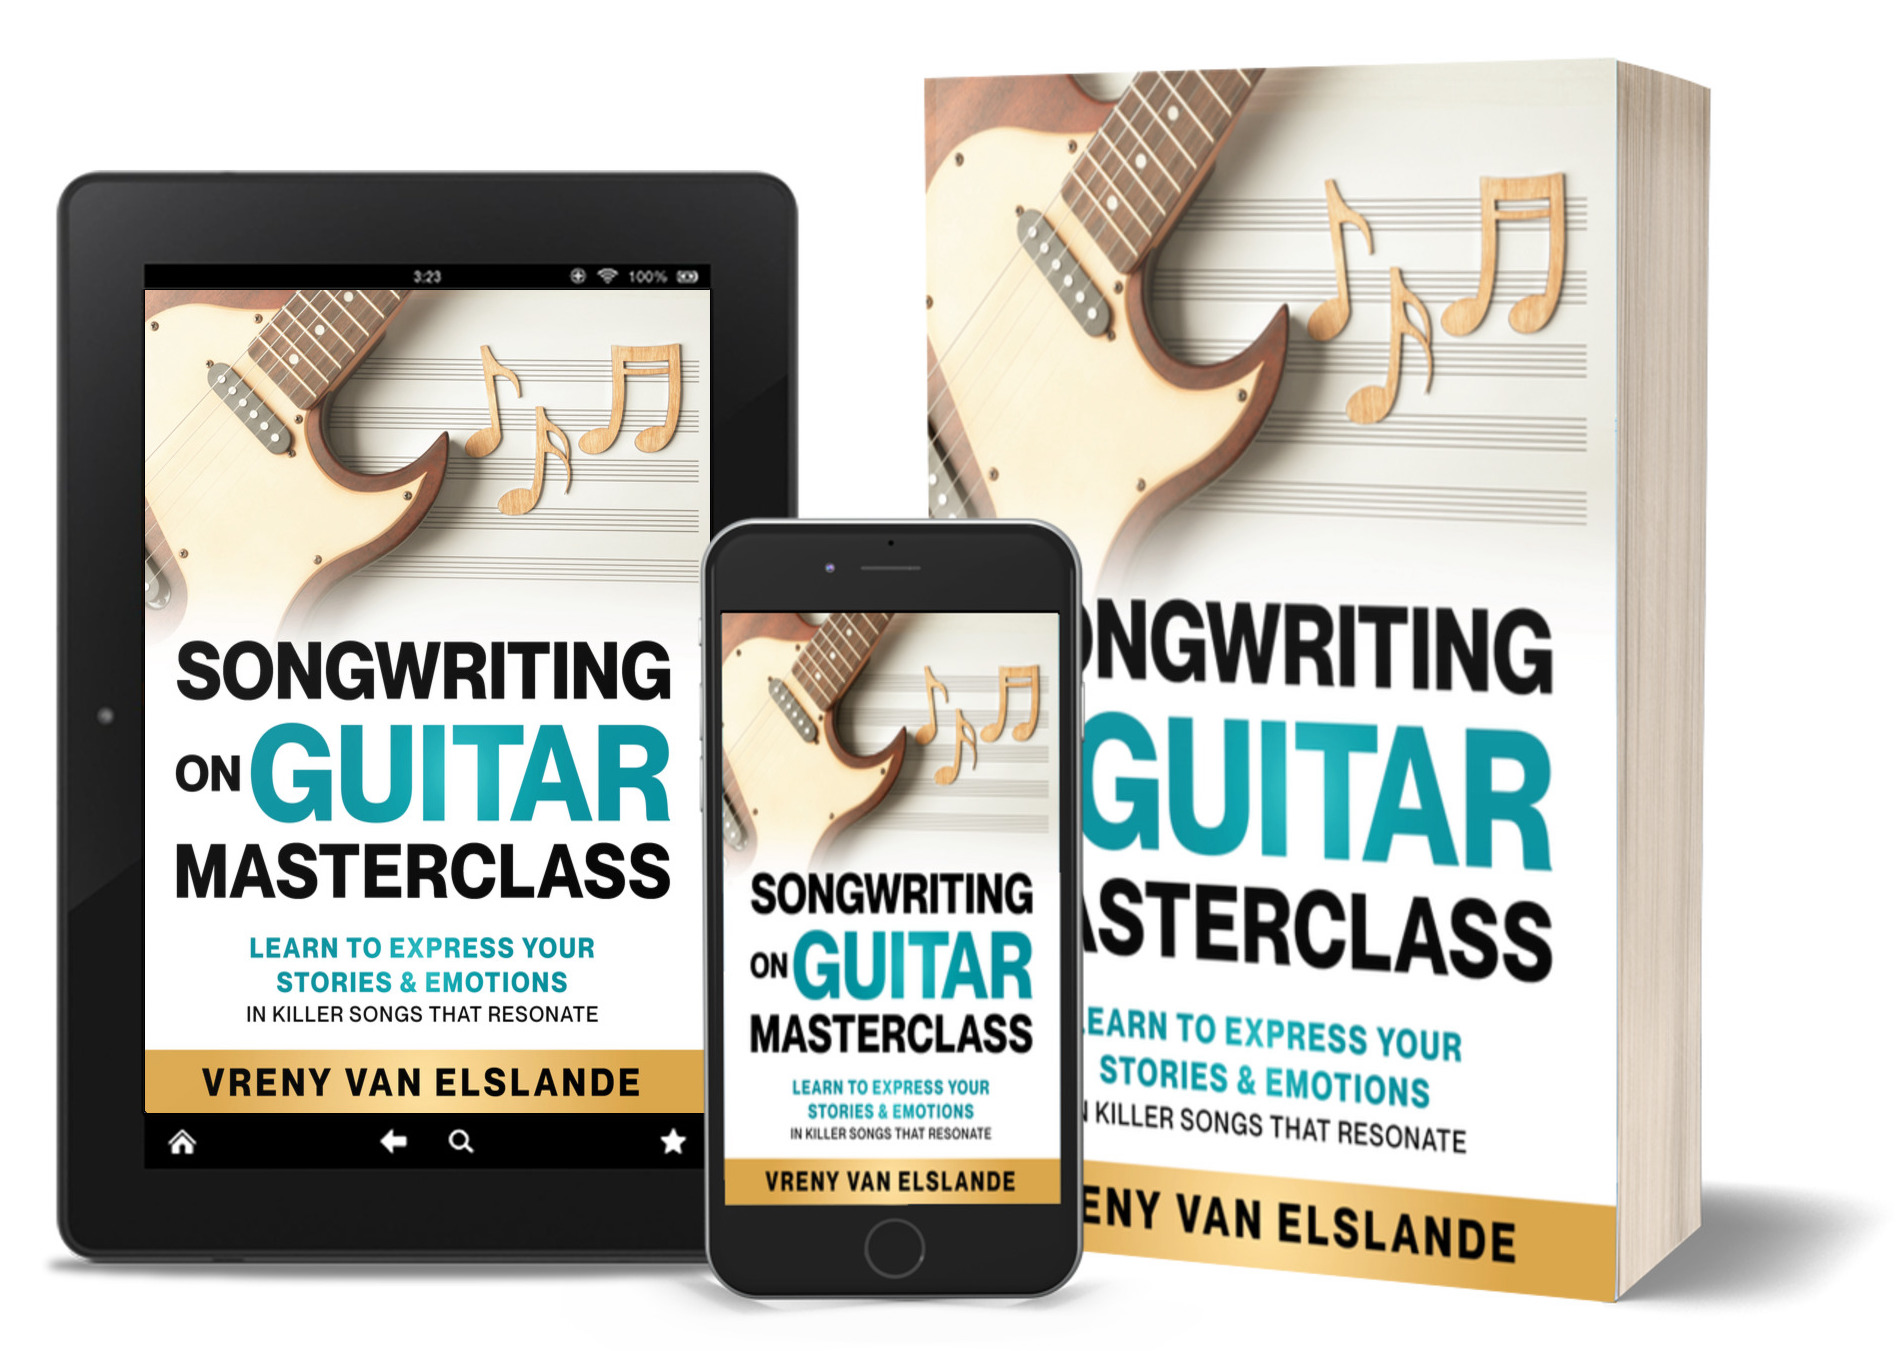 Songwriting on Guitar Masterclass